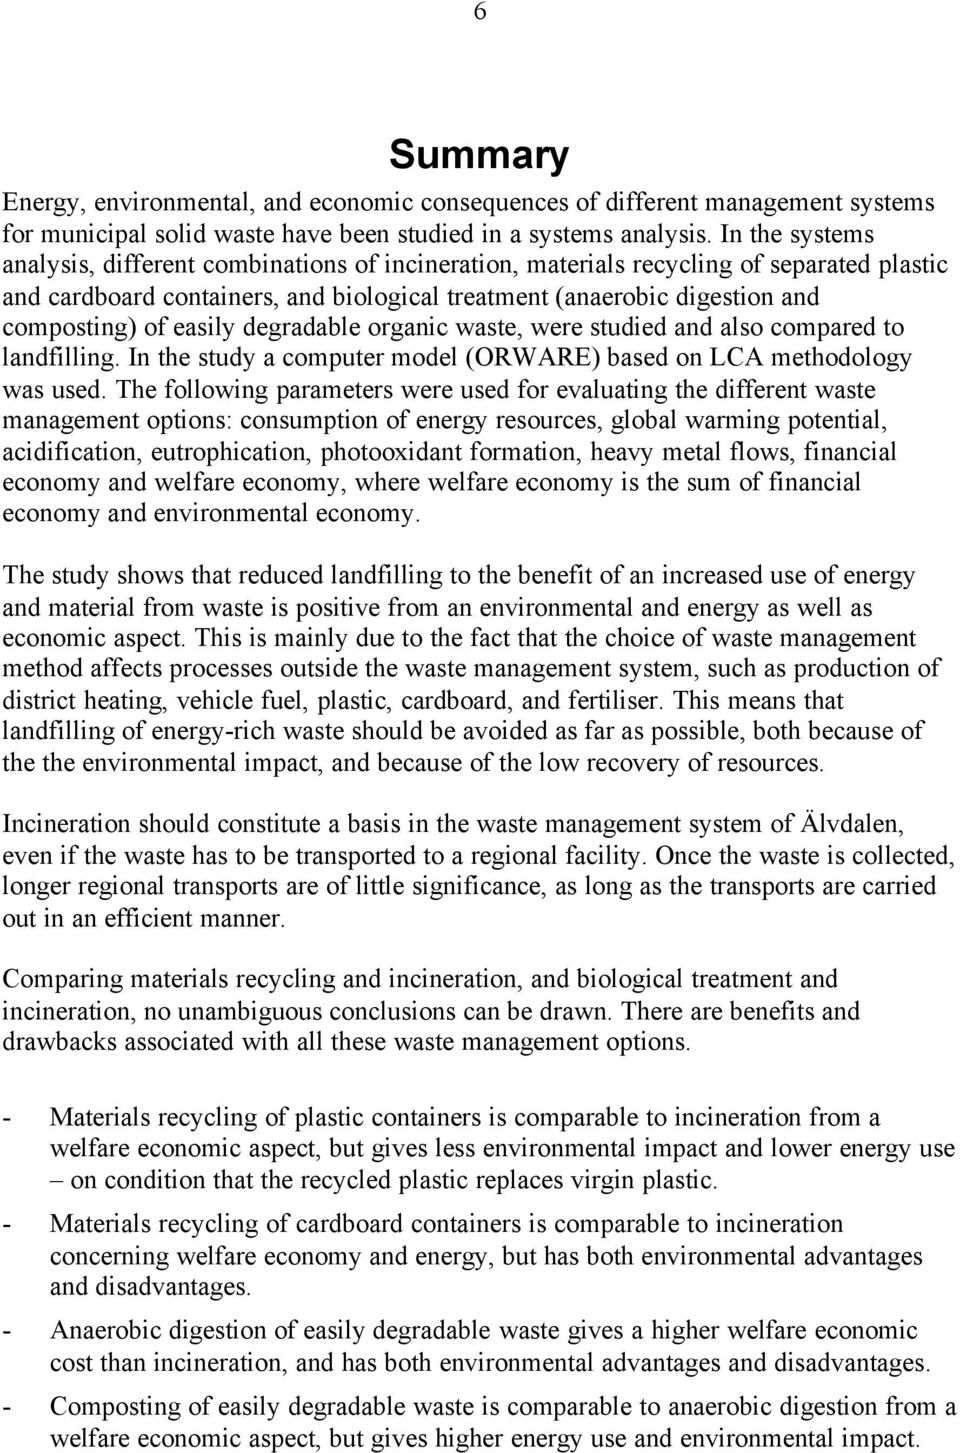 easily degradable organic waste, were studied and also compared to landfilling. In the study a computer model (ORWARE) based on LCA methodology was used.